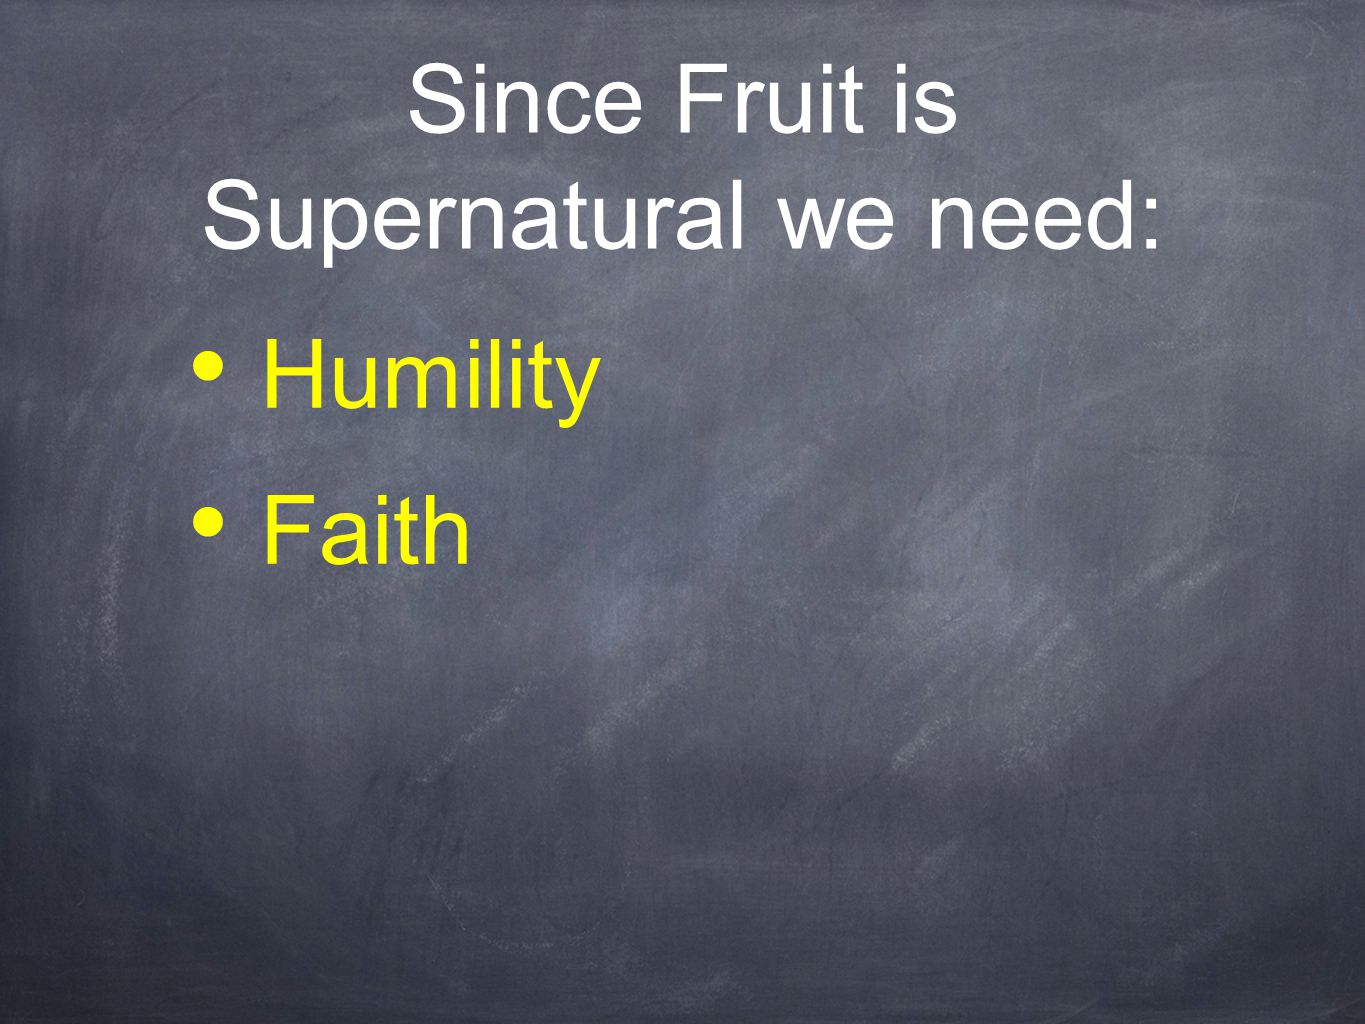 Since Fruit is Supernatural we need: Humility Faith